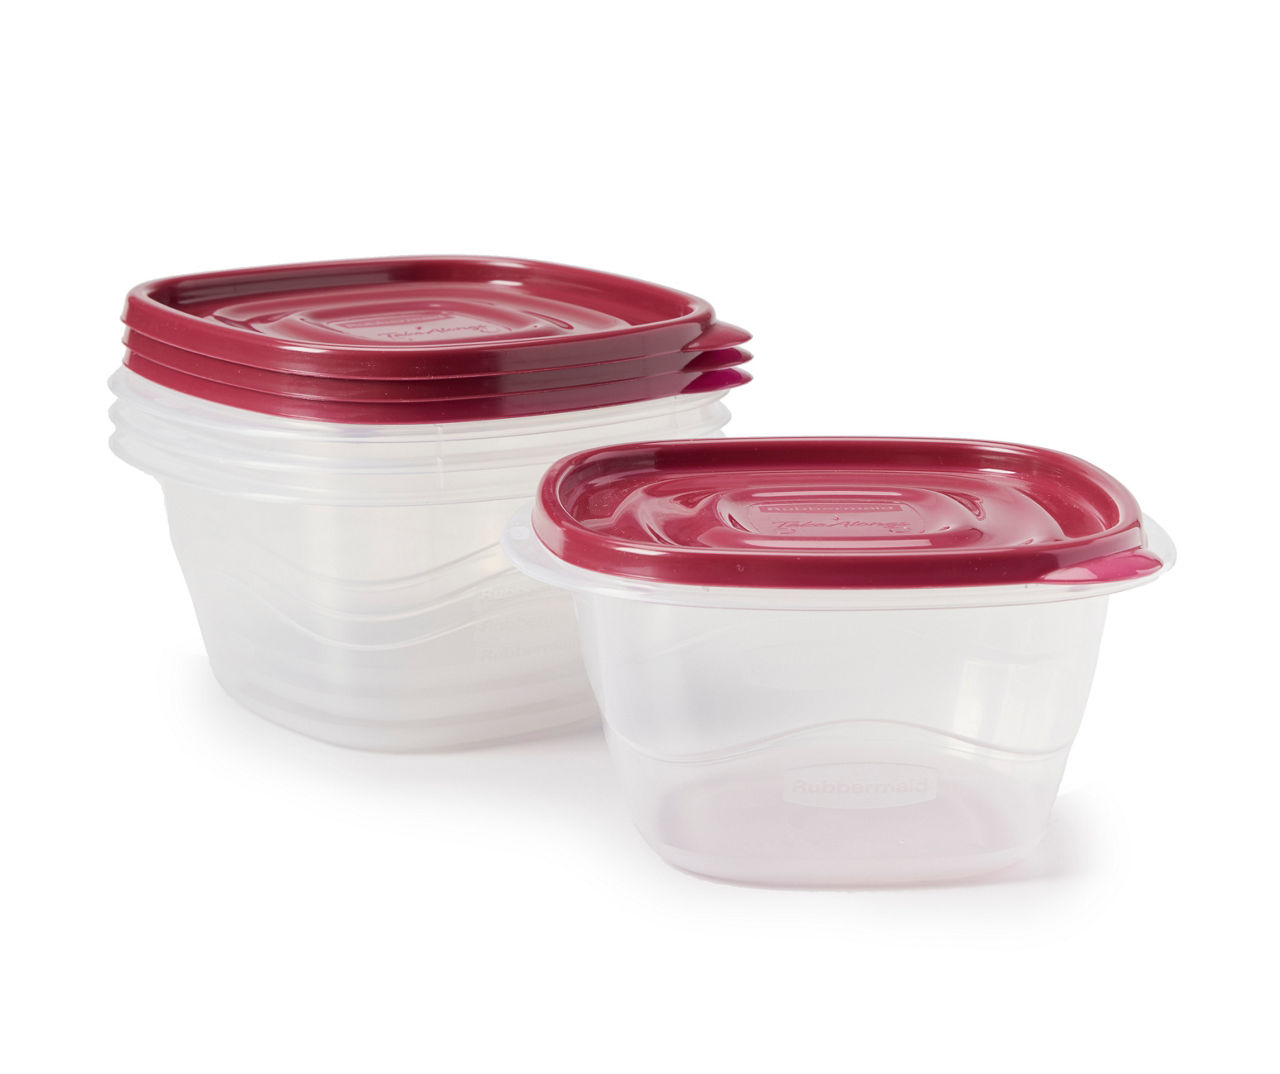 Easy-Find Lid Food Storage Container, 7-Cups